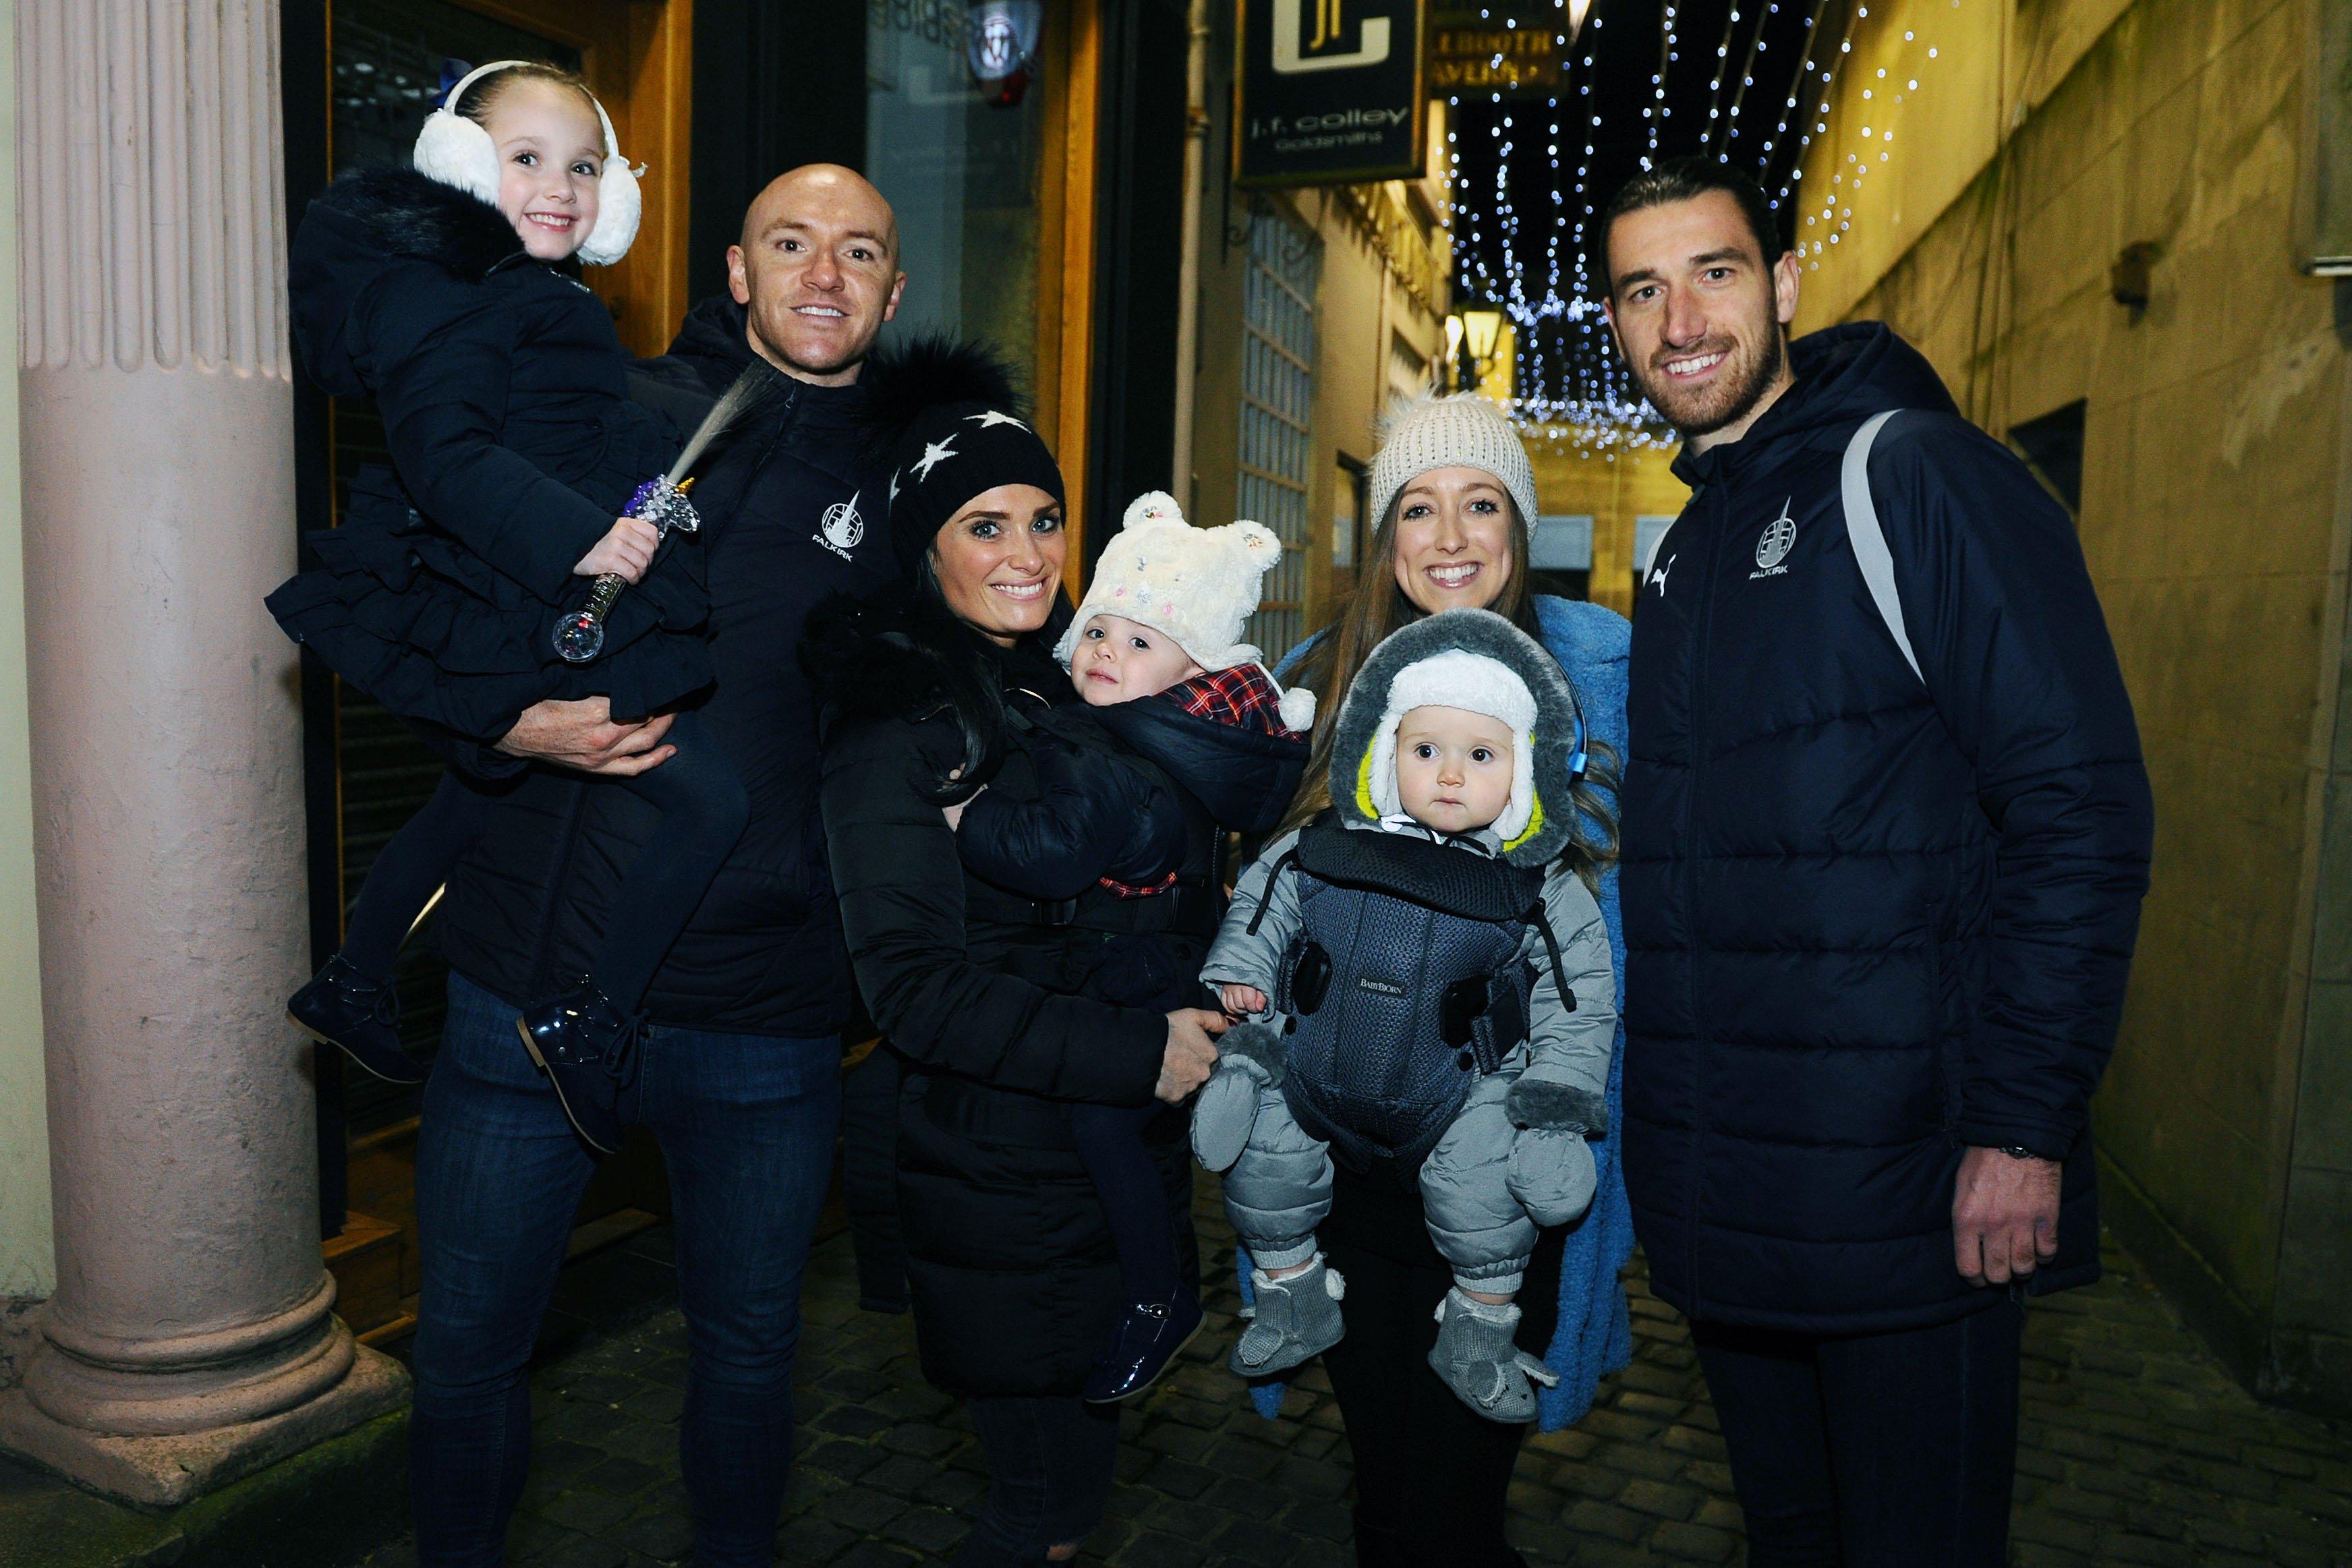 Falkirk Christmas lights switch on, Falkirk High Street, Sunday, November 17. Falkirk FC's Conor Sammon and Gregor Buchanan with their families. Picture by Michael Gillen.